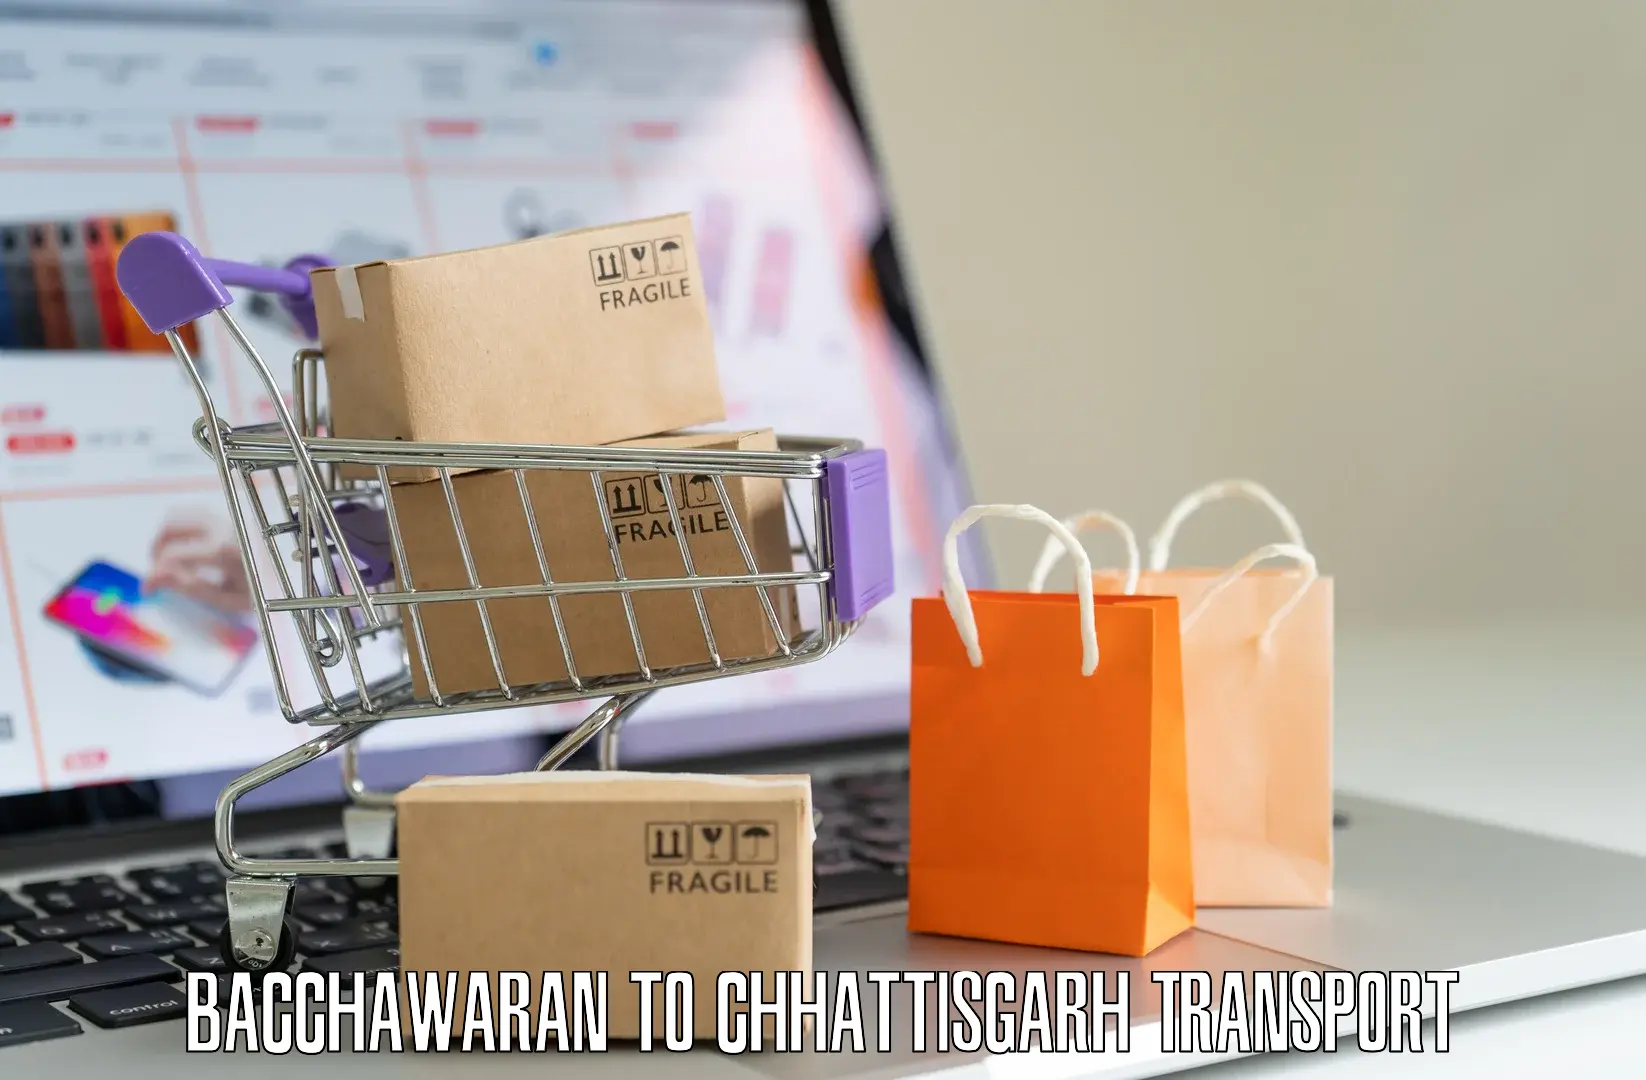 Road transport online services Bacchawaran to Raigarh